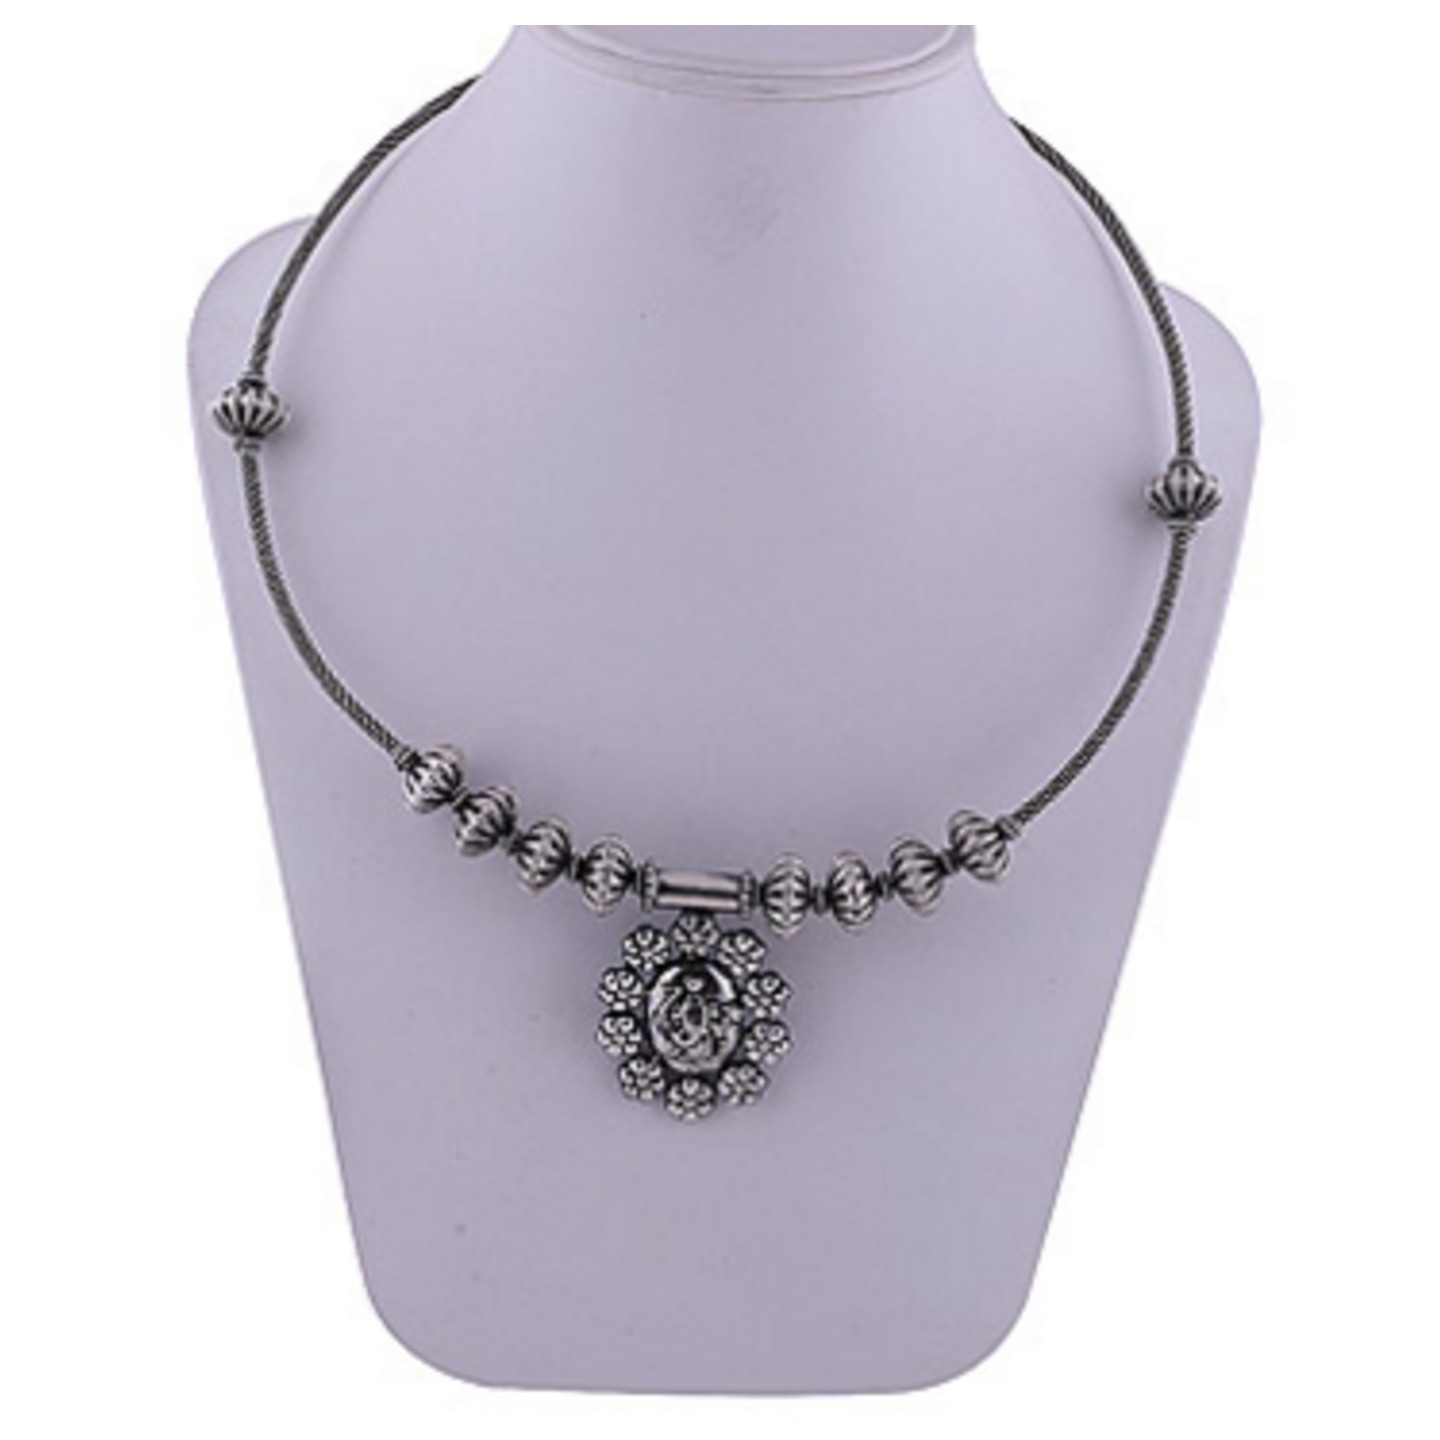 The Ganesha Silver Necklace